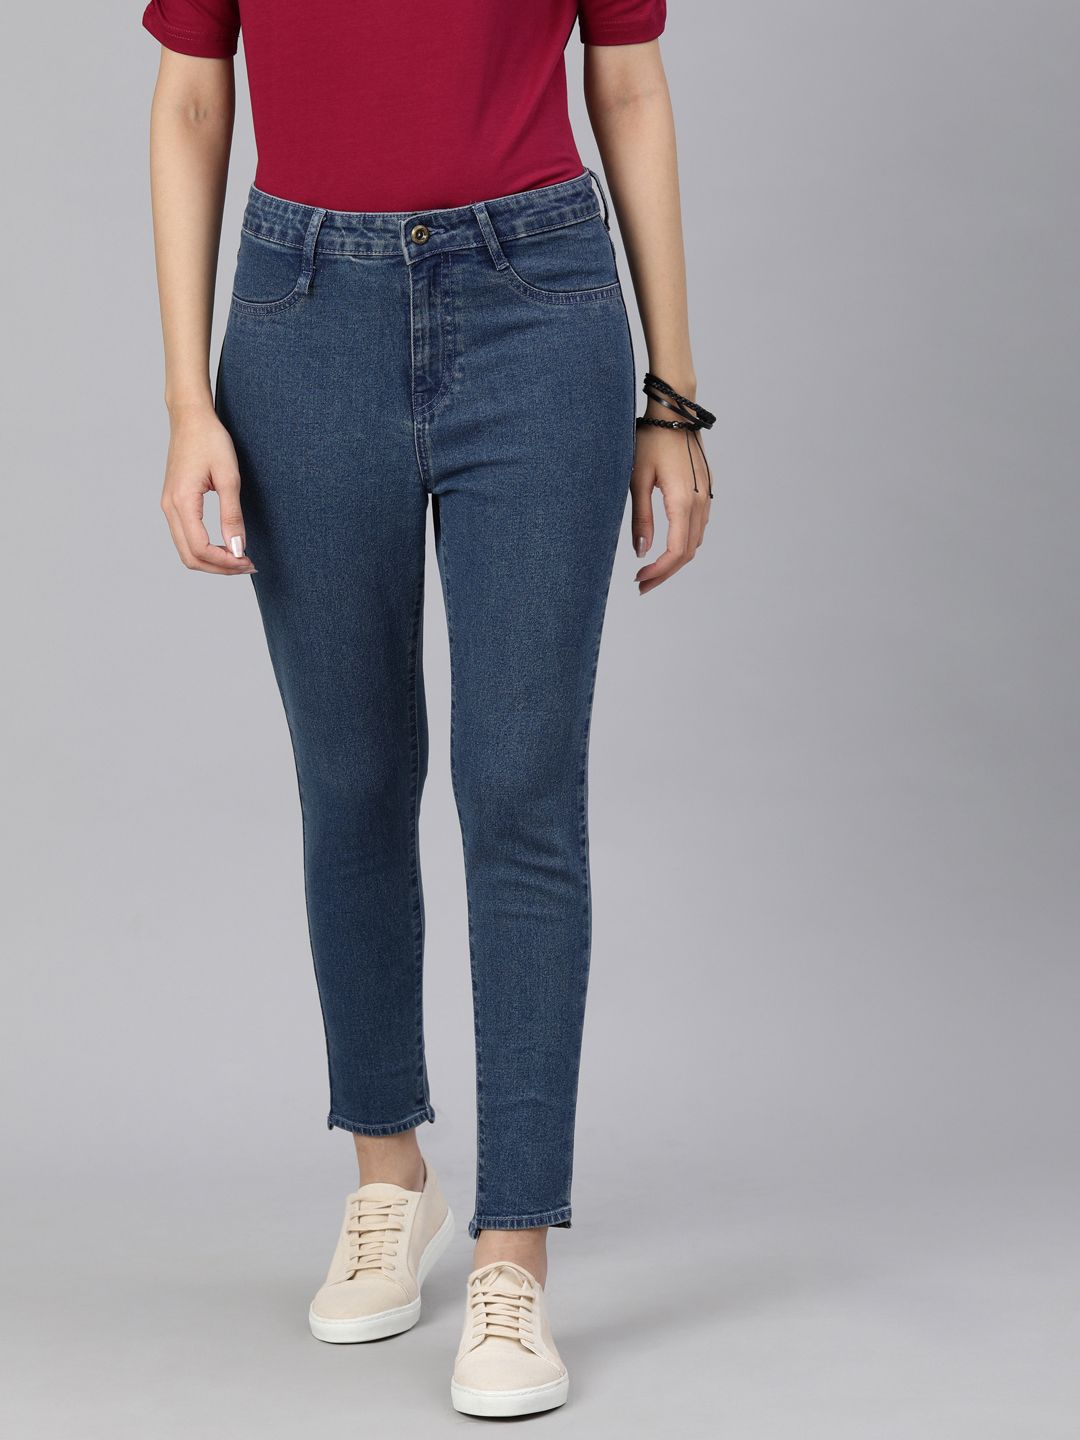 The Roadster Lifestyle Co Women Navy Blue Stretchable Jeans Price in India